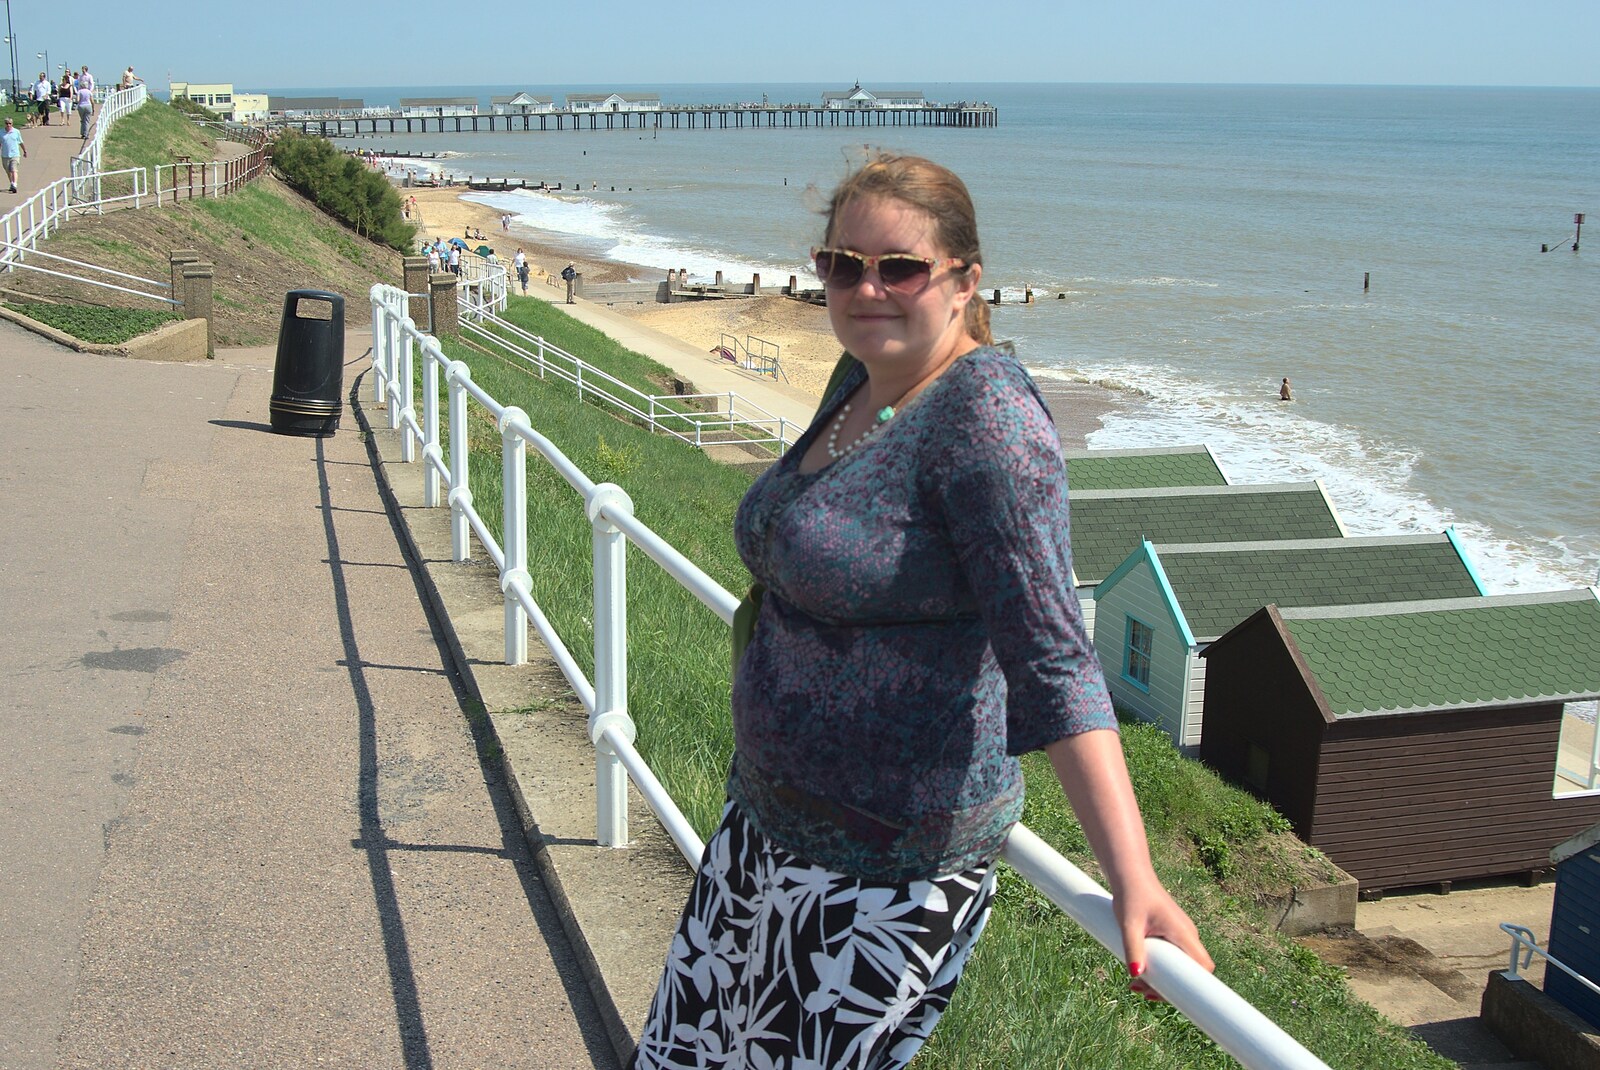 Isobel on the promenade from The First Anniversary, Southwold, Suffolk - 3rd July 2011